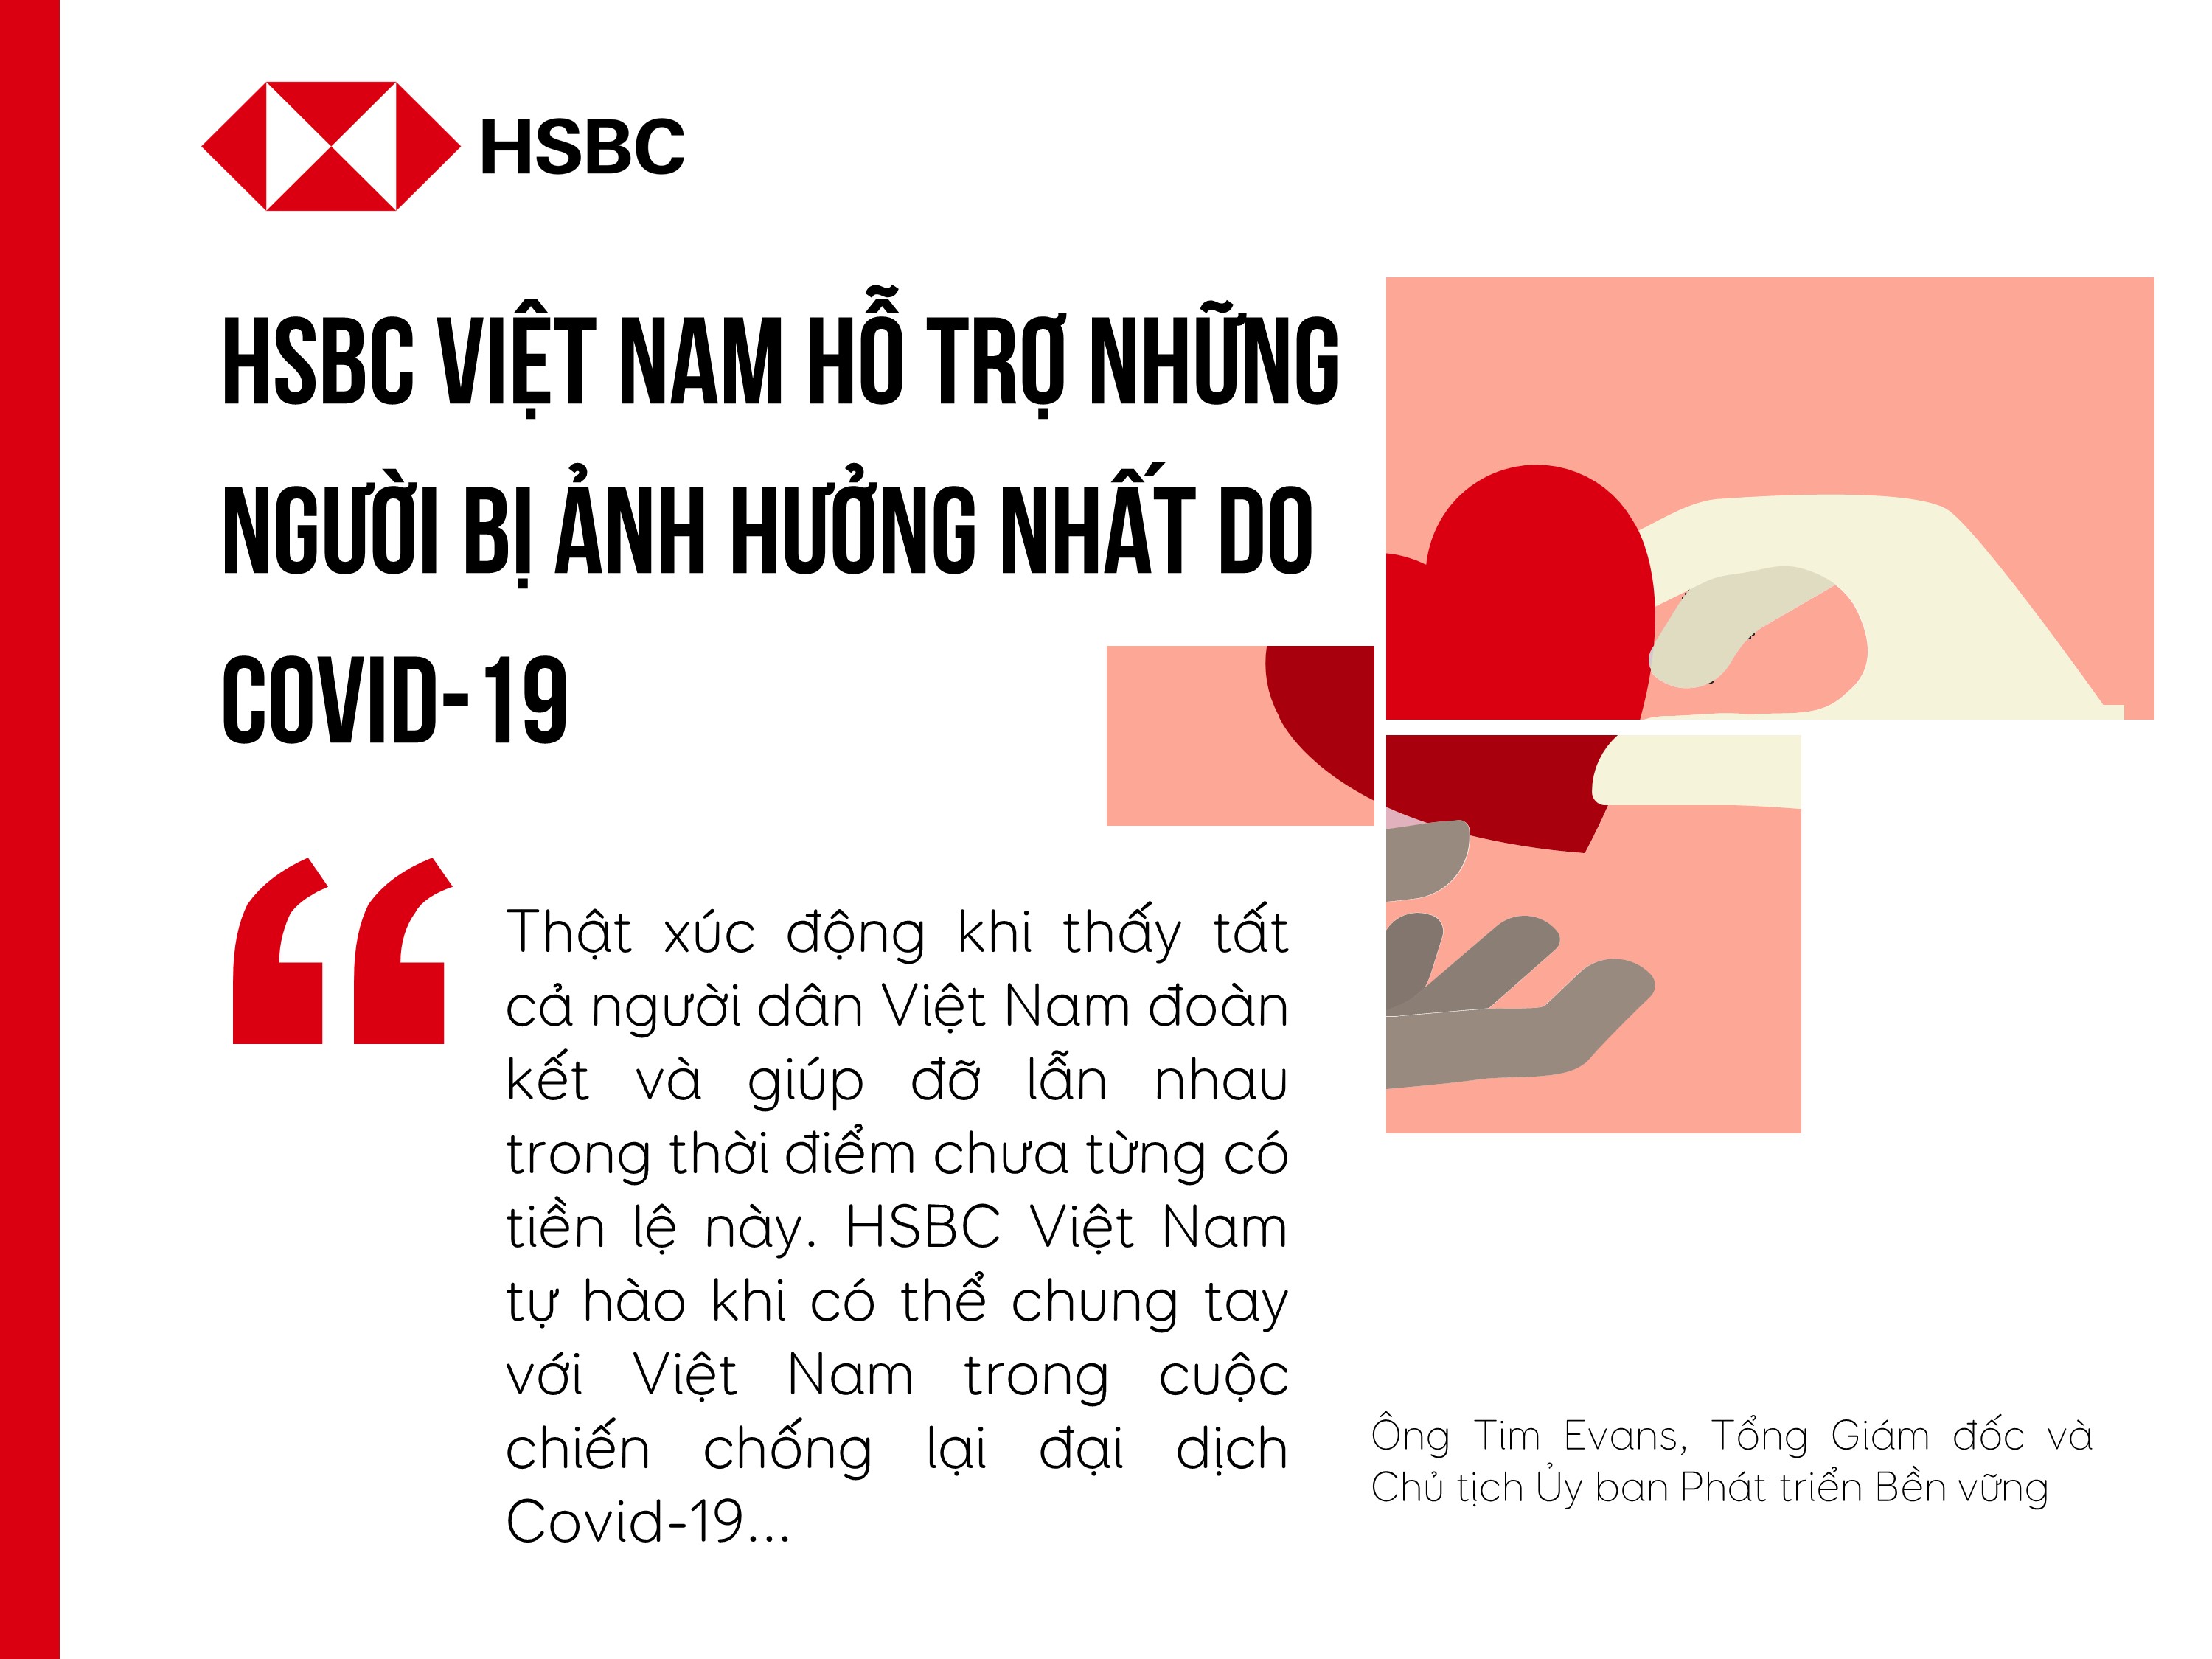 HSBC Vietnam acts to assist vulnerable groups during Covid-19